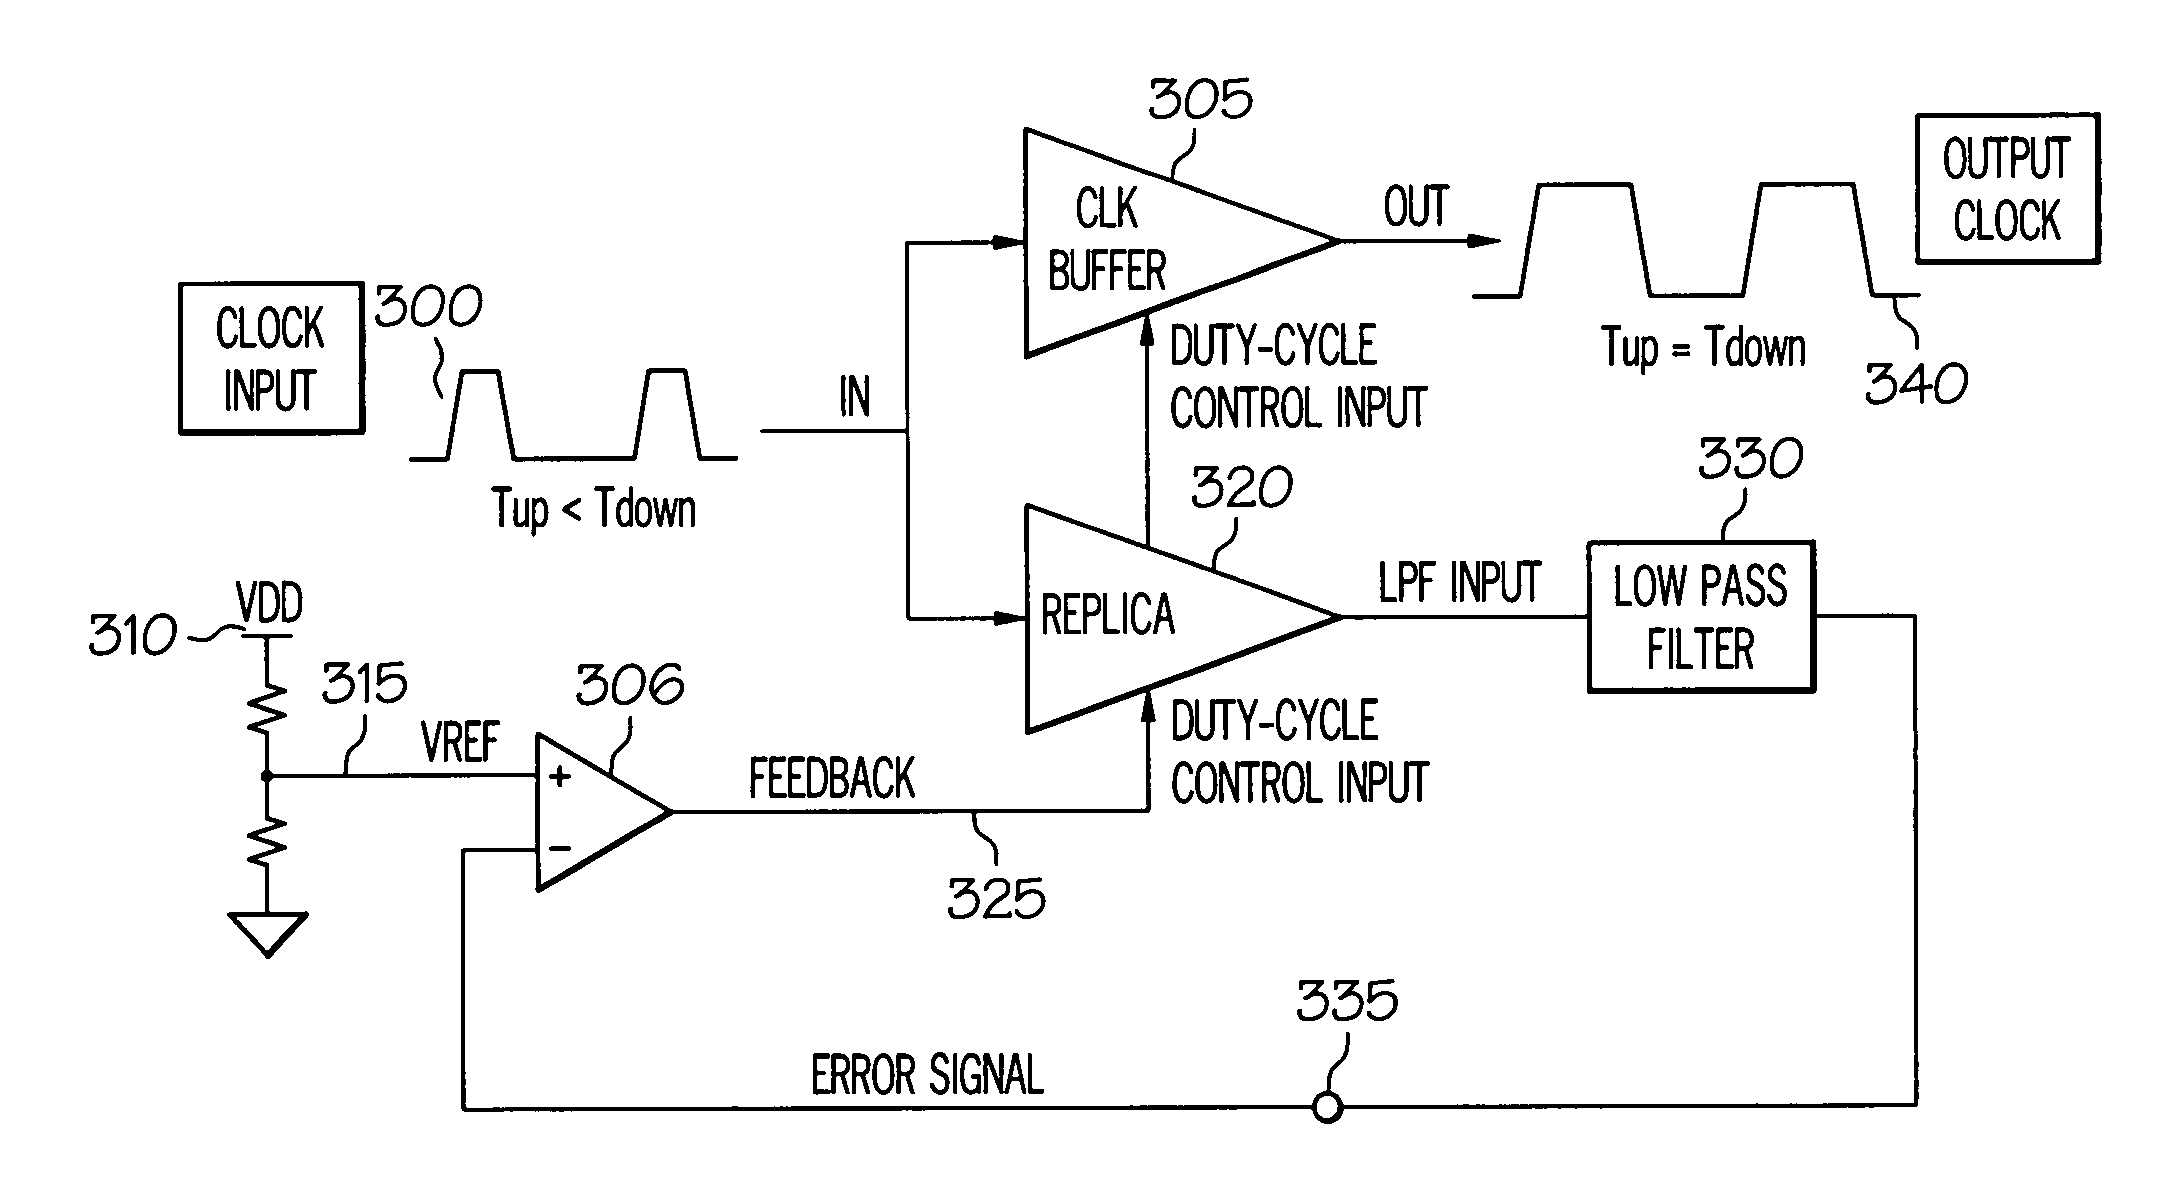 Duty-cycle correction circuit for differential clocking